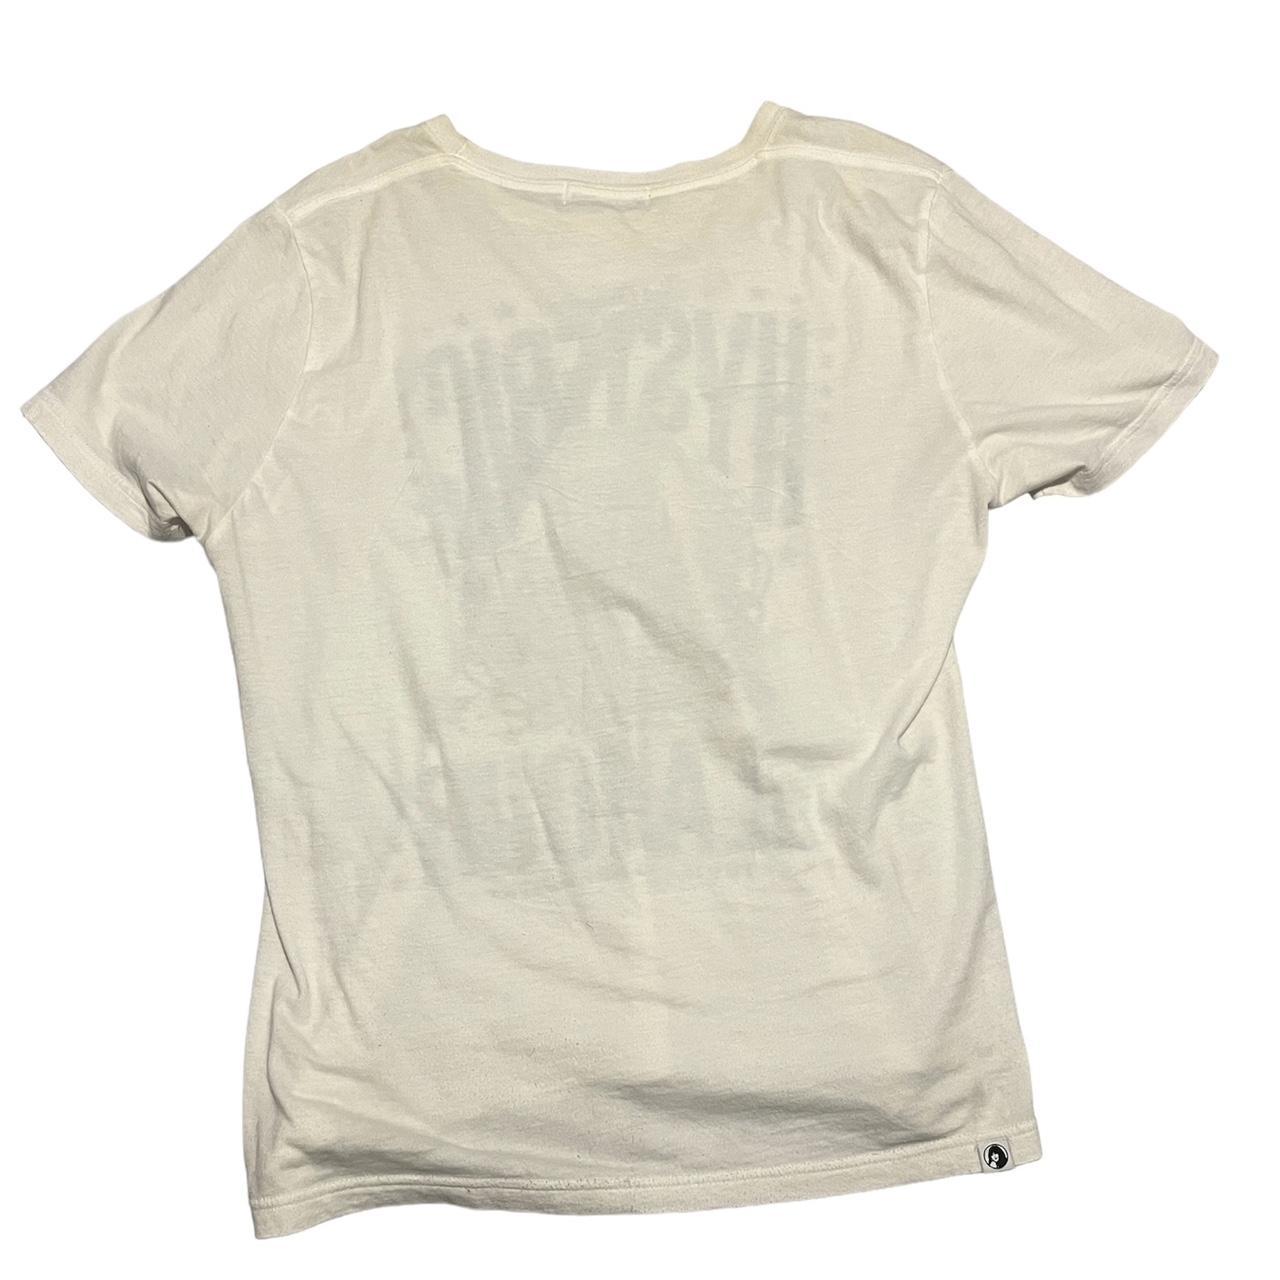 Hysteric Glamour Men's White T-shirt (2)